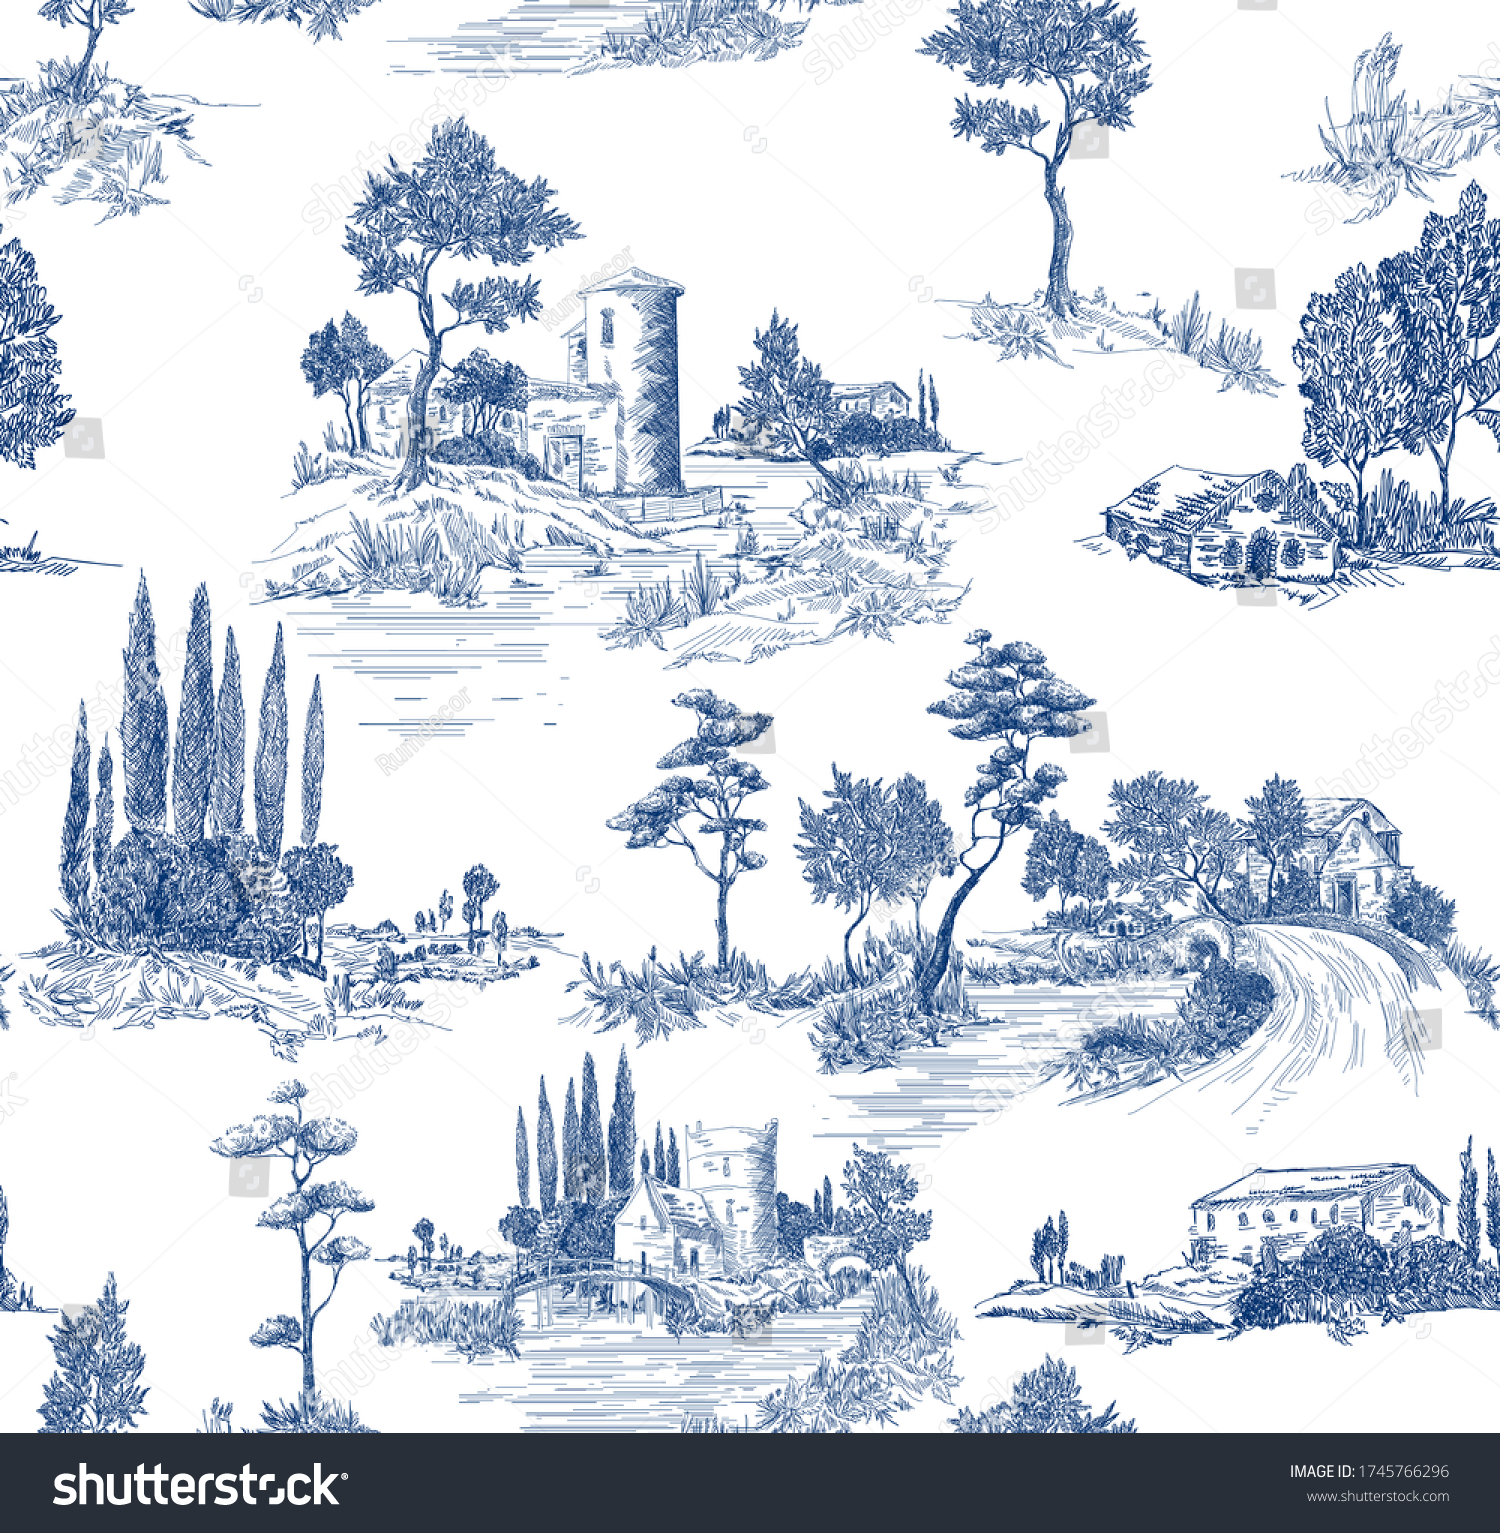 SVG of Toile de jouy pattern with countryside views with castles and houses and landscapes with trees, river and bridges with road in blue color svg